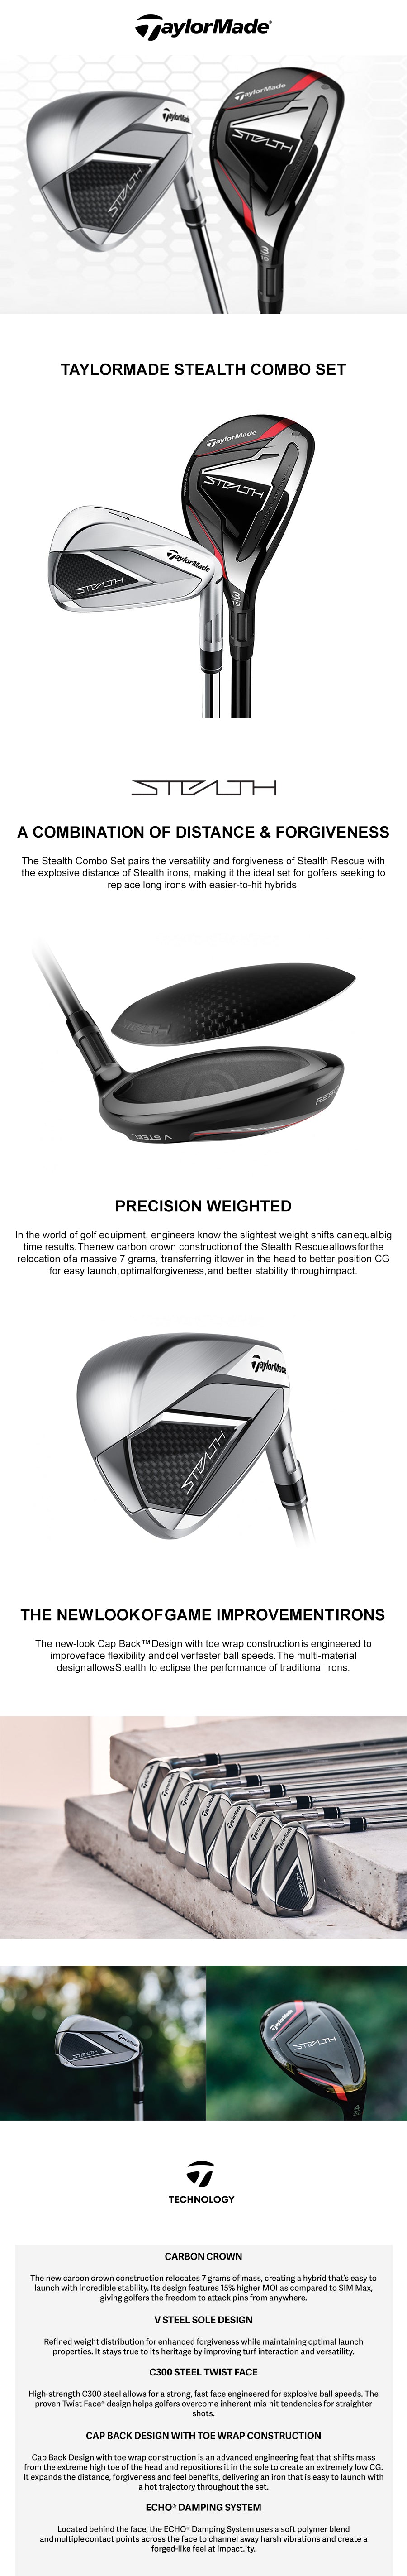 taylormade-stealth-Pre-Built-combo-set